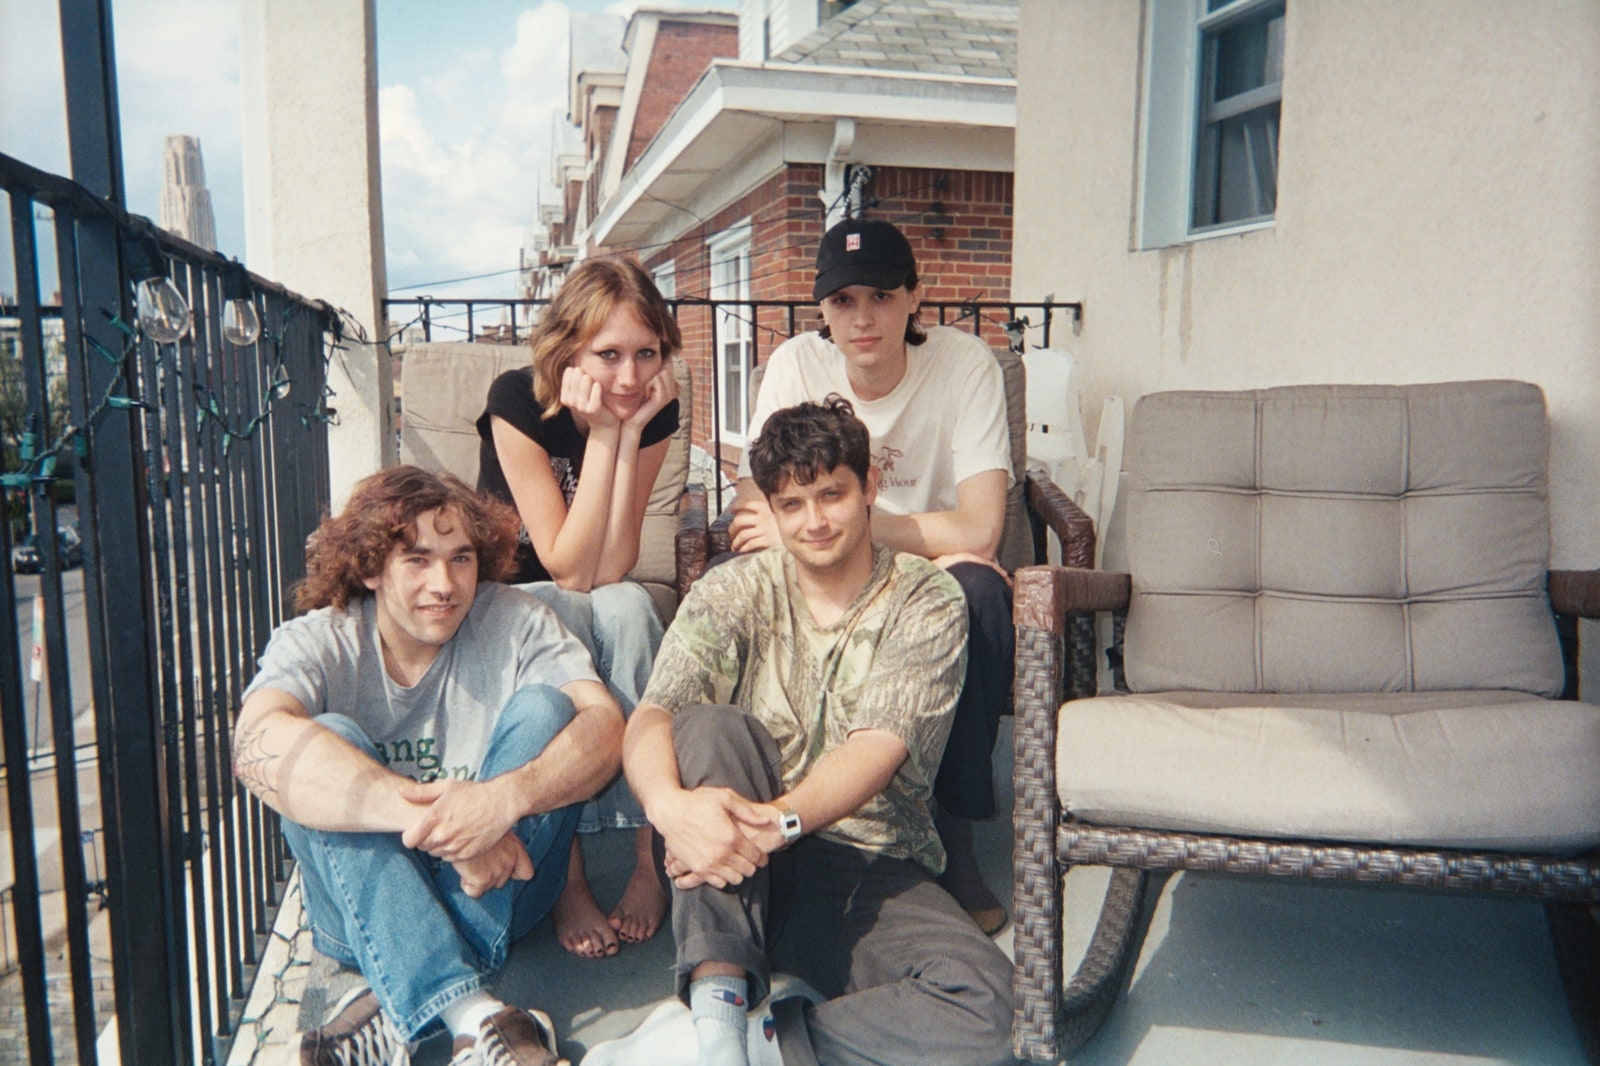 The band Feeble Little Horse posing together on a porch